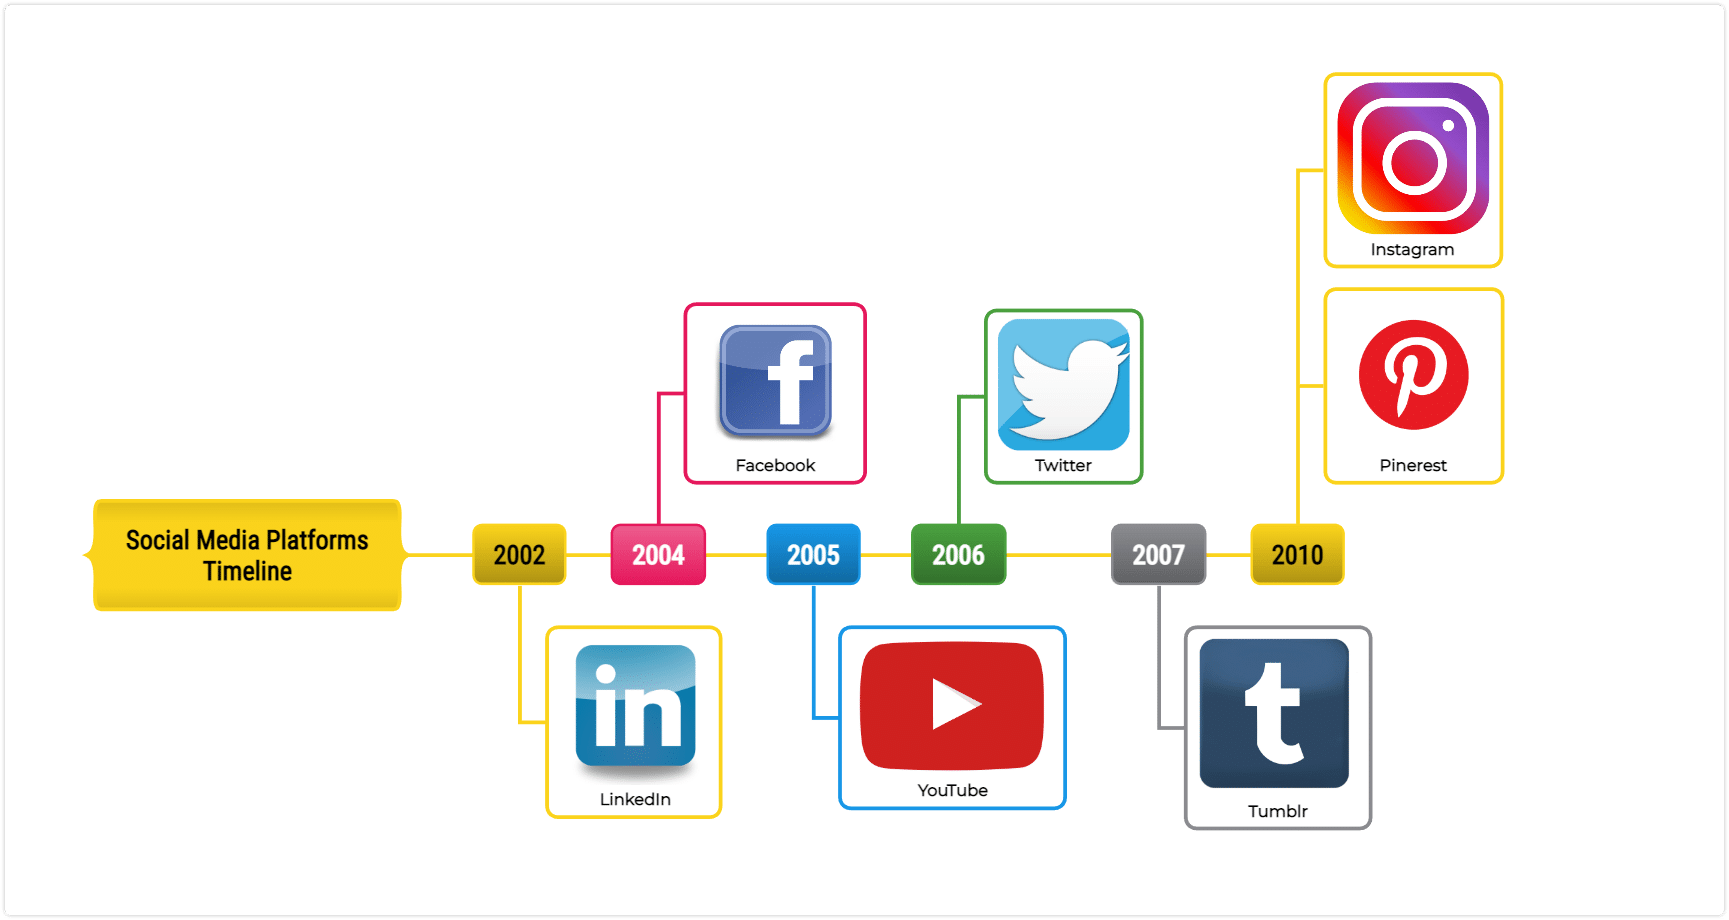 organize information visually using a timeline - social media timeline example